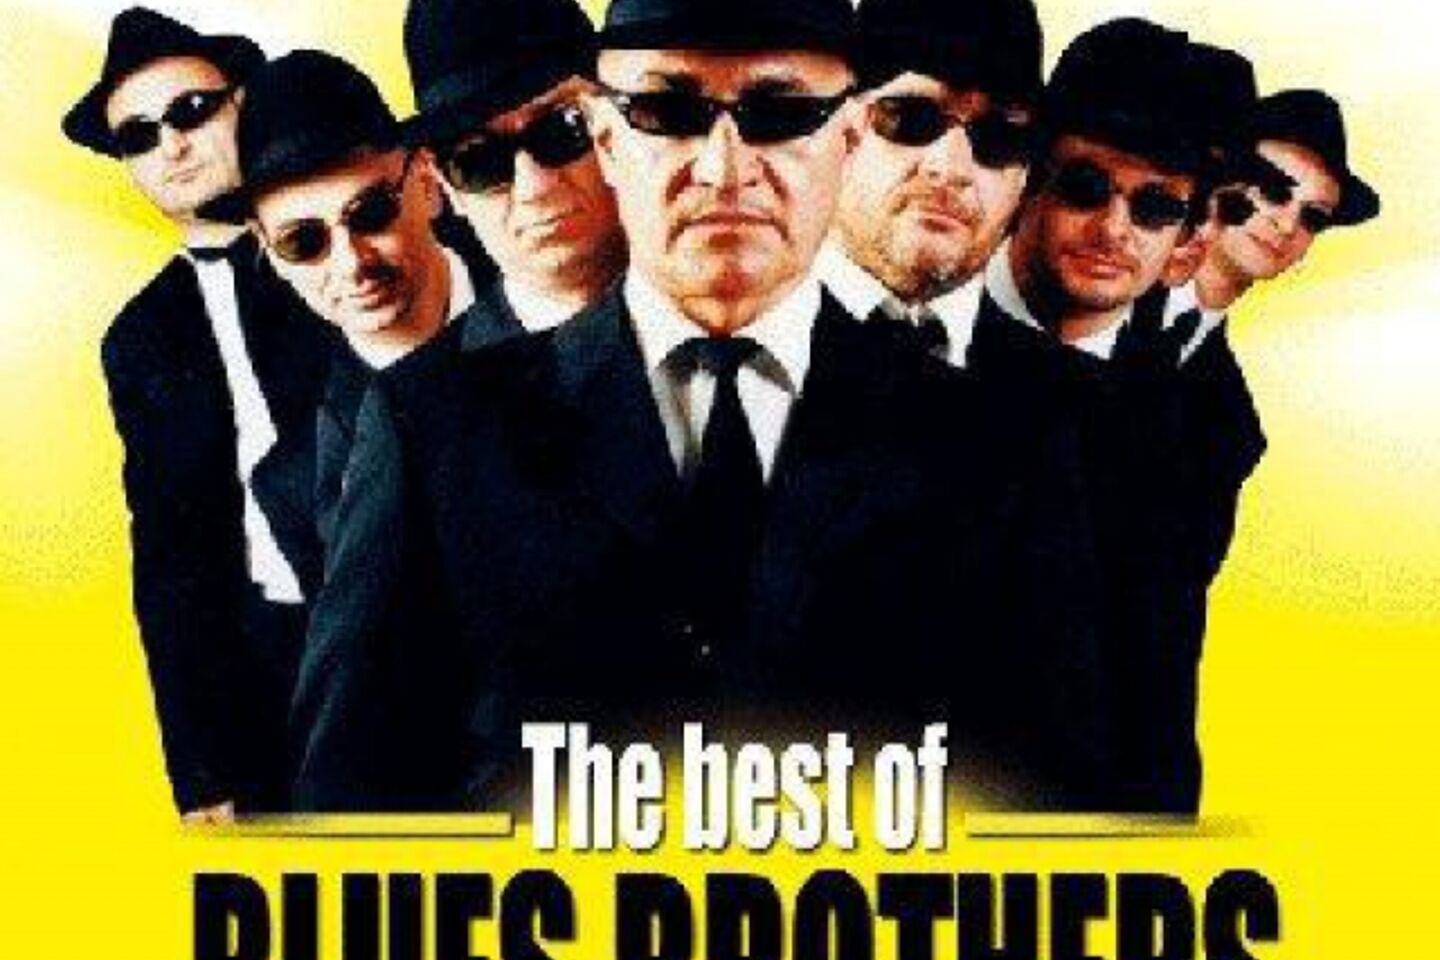 The Eight Killers (Blues Brothres Show)